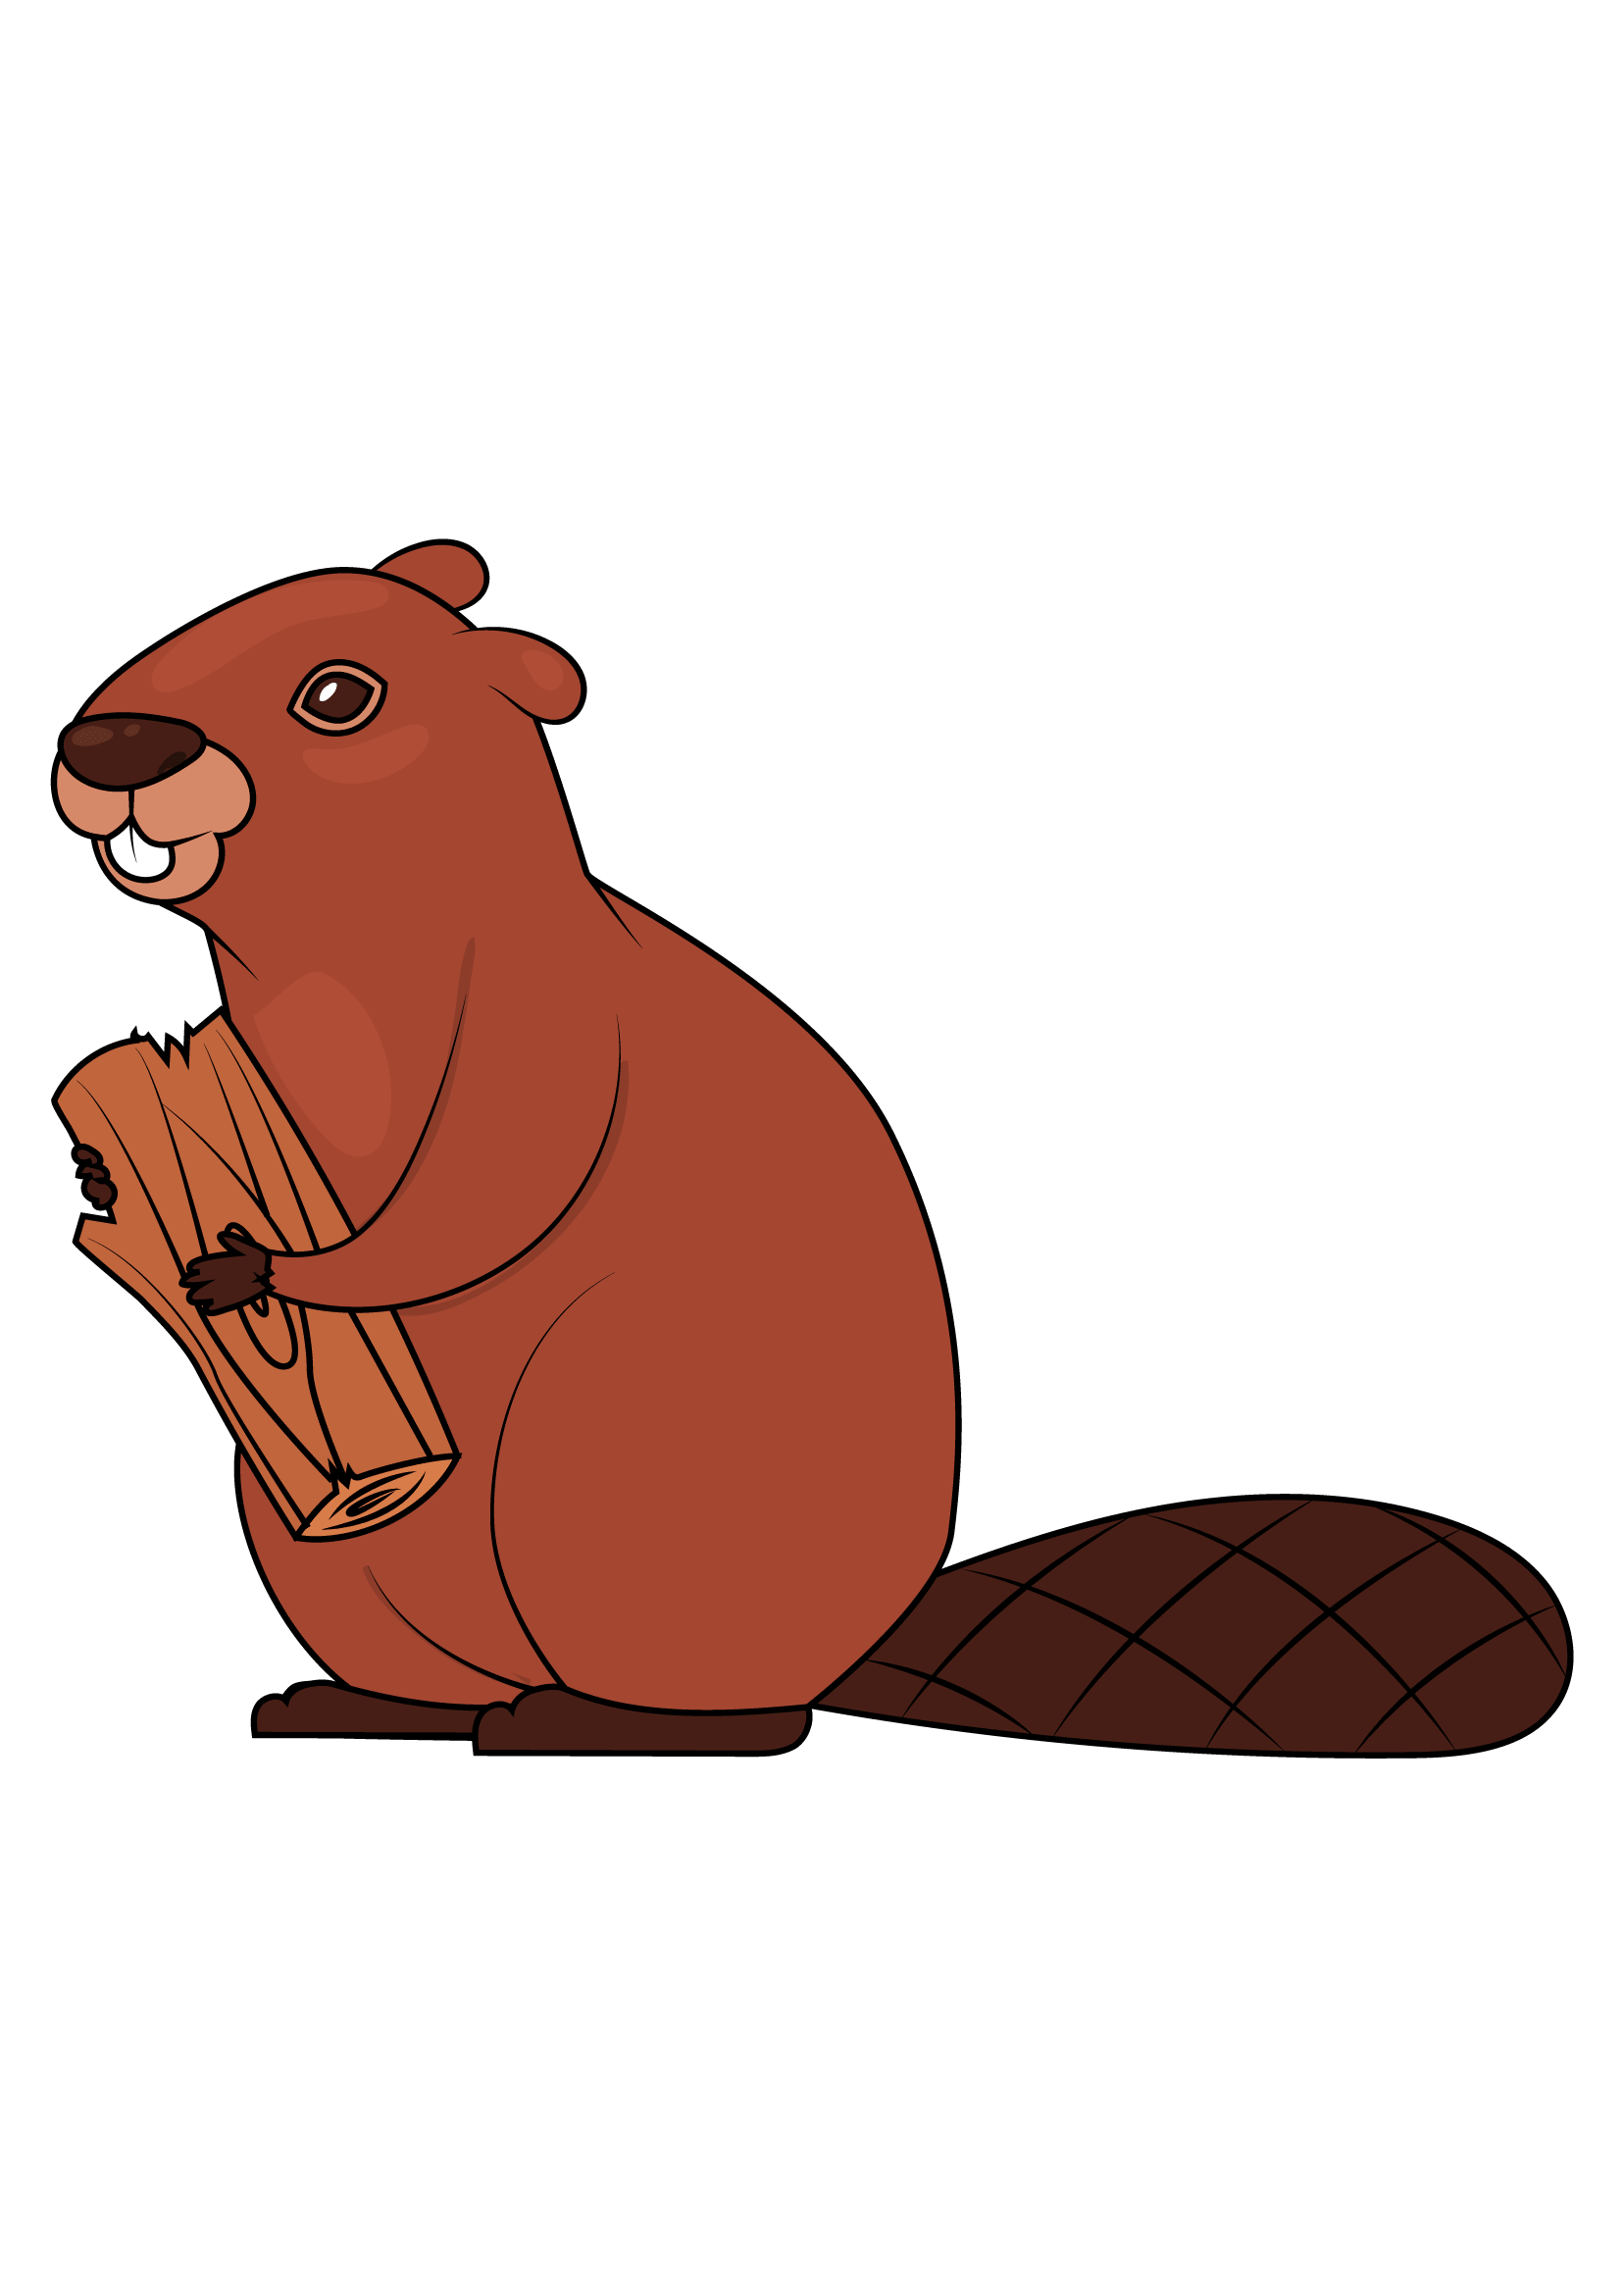 How to Draw A Beaver Step by Step Printable